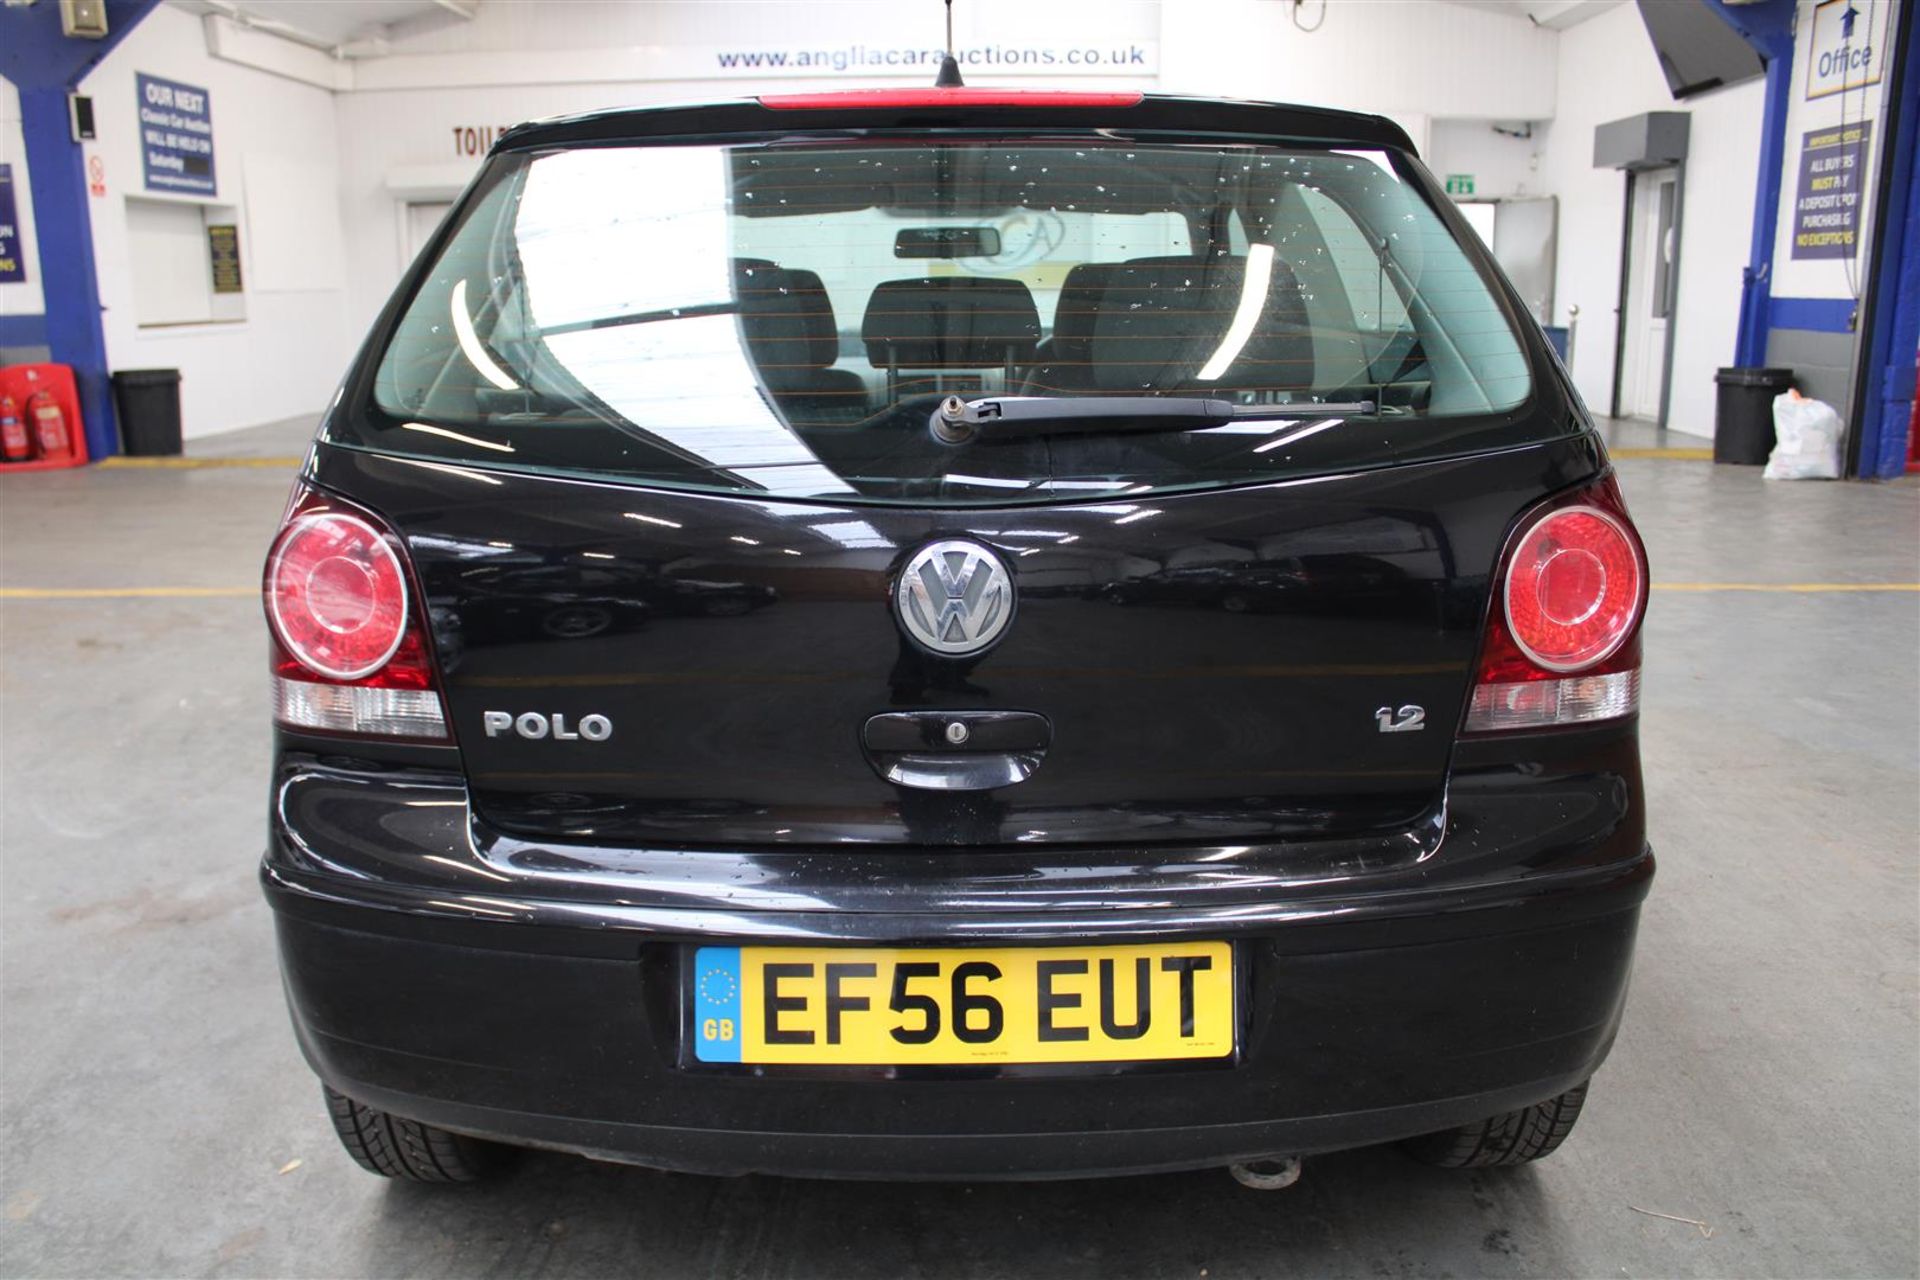 56 06 VW Polo S 64 - Image 29 of 31